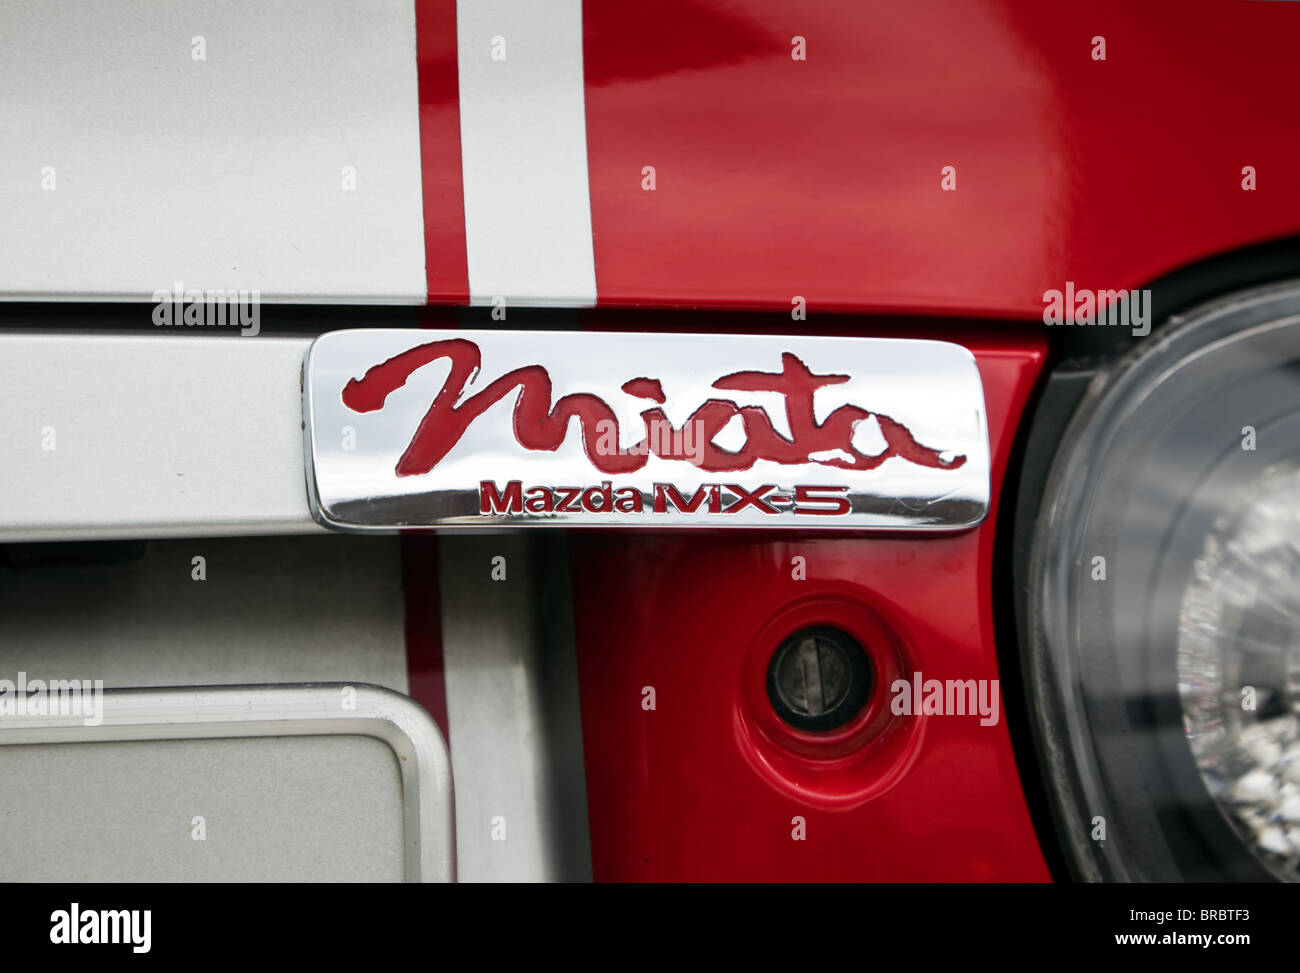 chrome plate with Miata logo on back of red Mazda MX-5 in racing trim Stock Photo